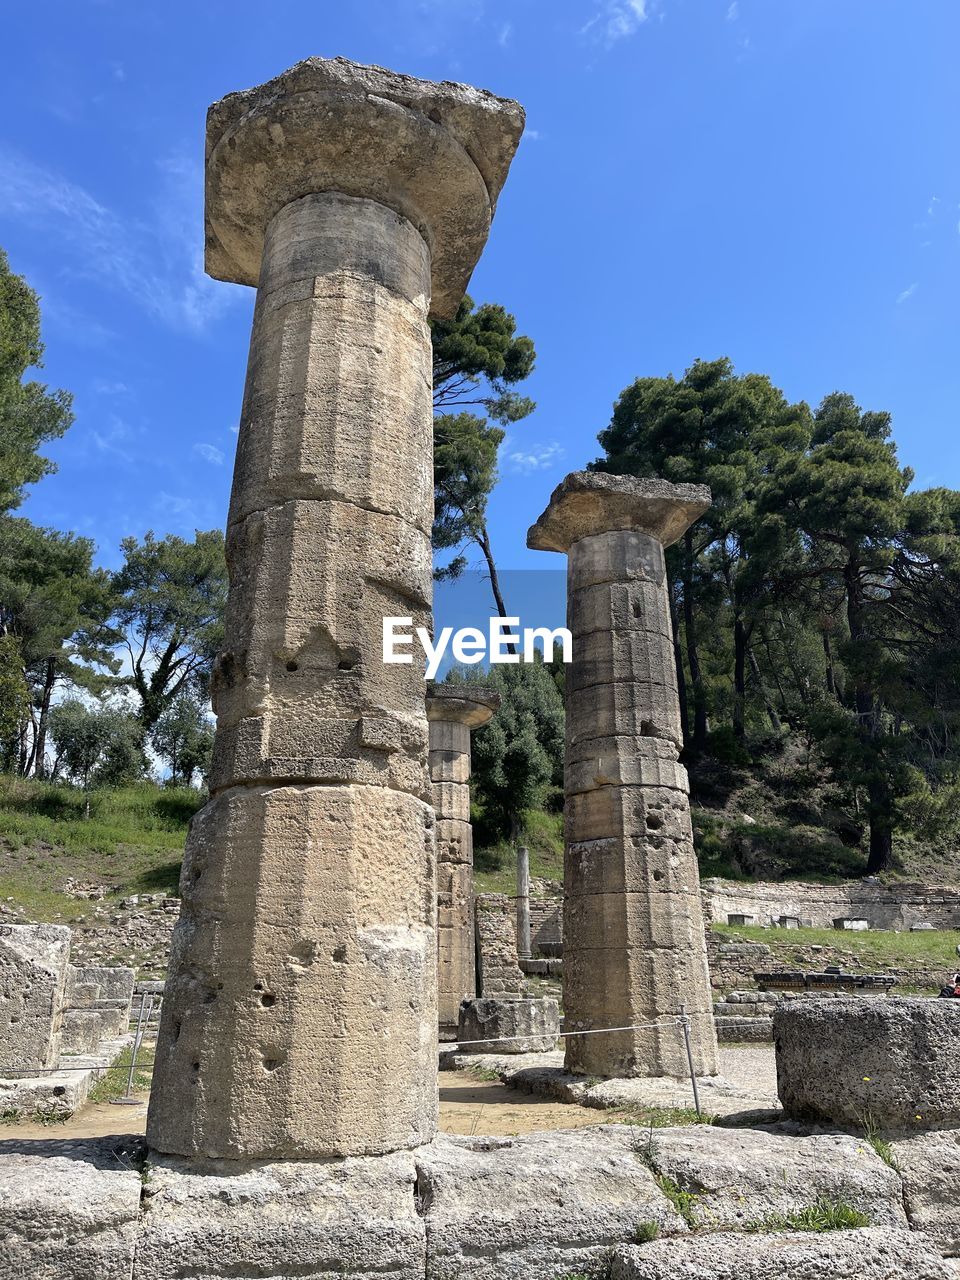 history, ruins, the past, architecture, old ruin, ancient, landmark, archaeological site, sky, ancient history, travel destinations, nature, column, ancient civilization, built structure, architectural column, plant, travel, tree, ruined, old, no people, temple - building, archaeology, rock, monument, historic site, stone material, outdoors, blue, religion, tourism, cloud, monolith, damaged, day, memorial, city